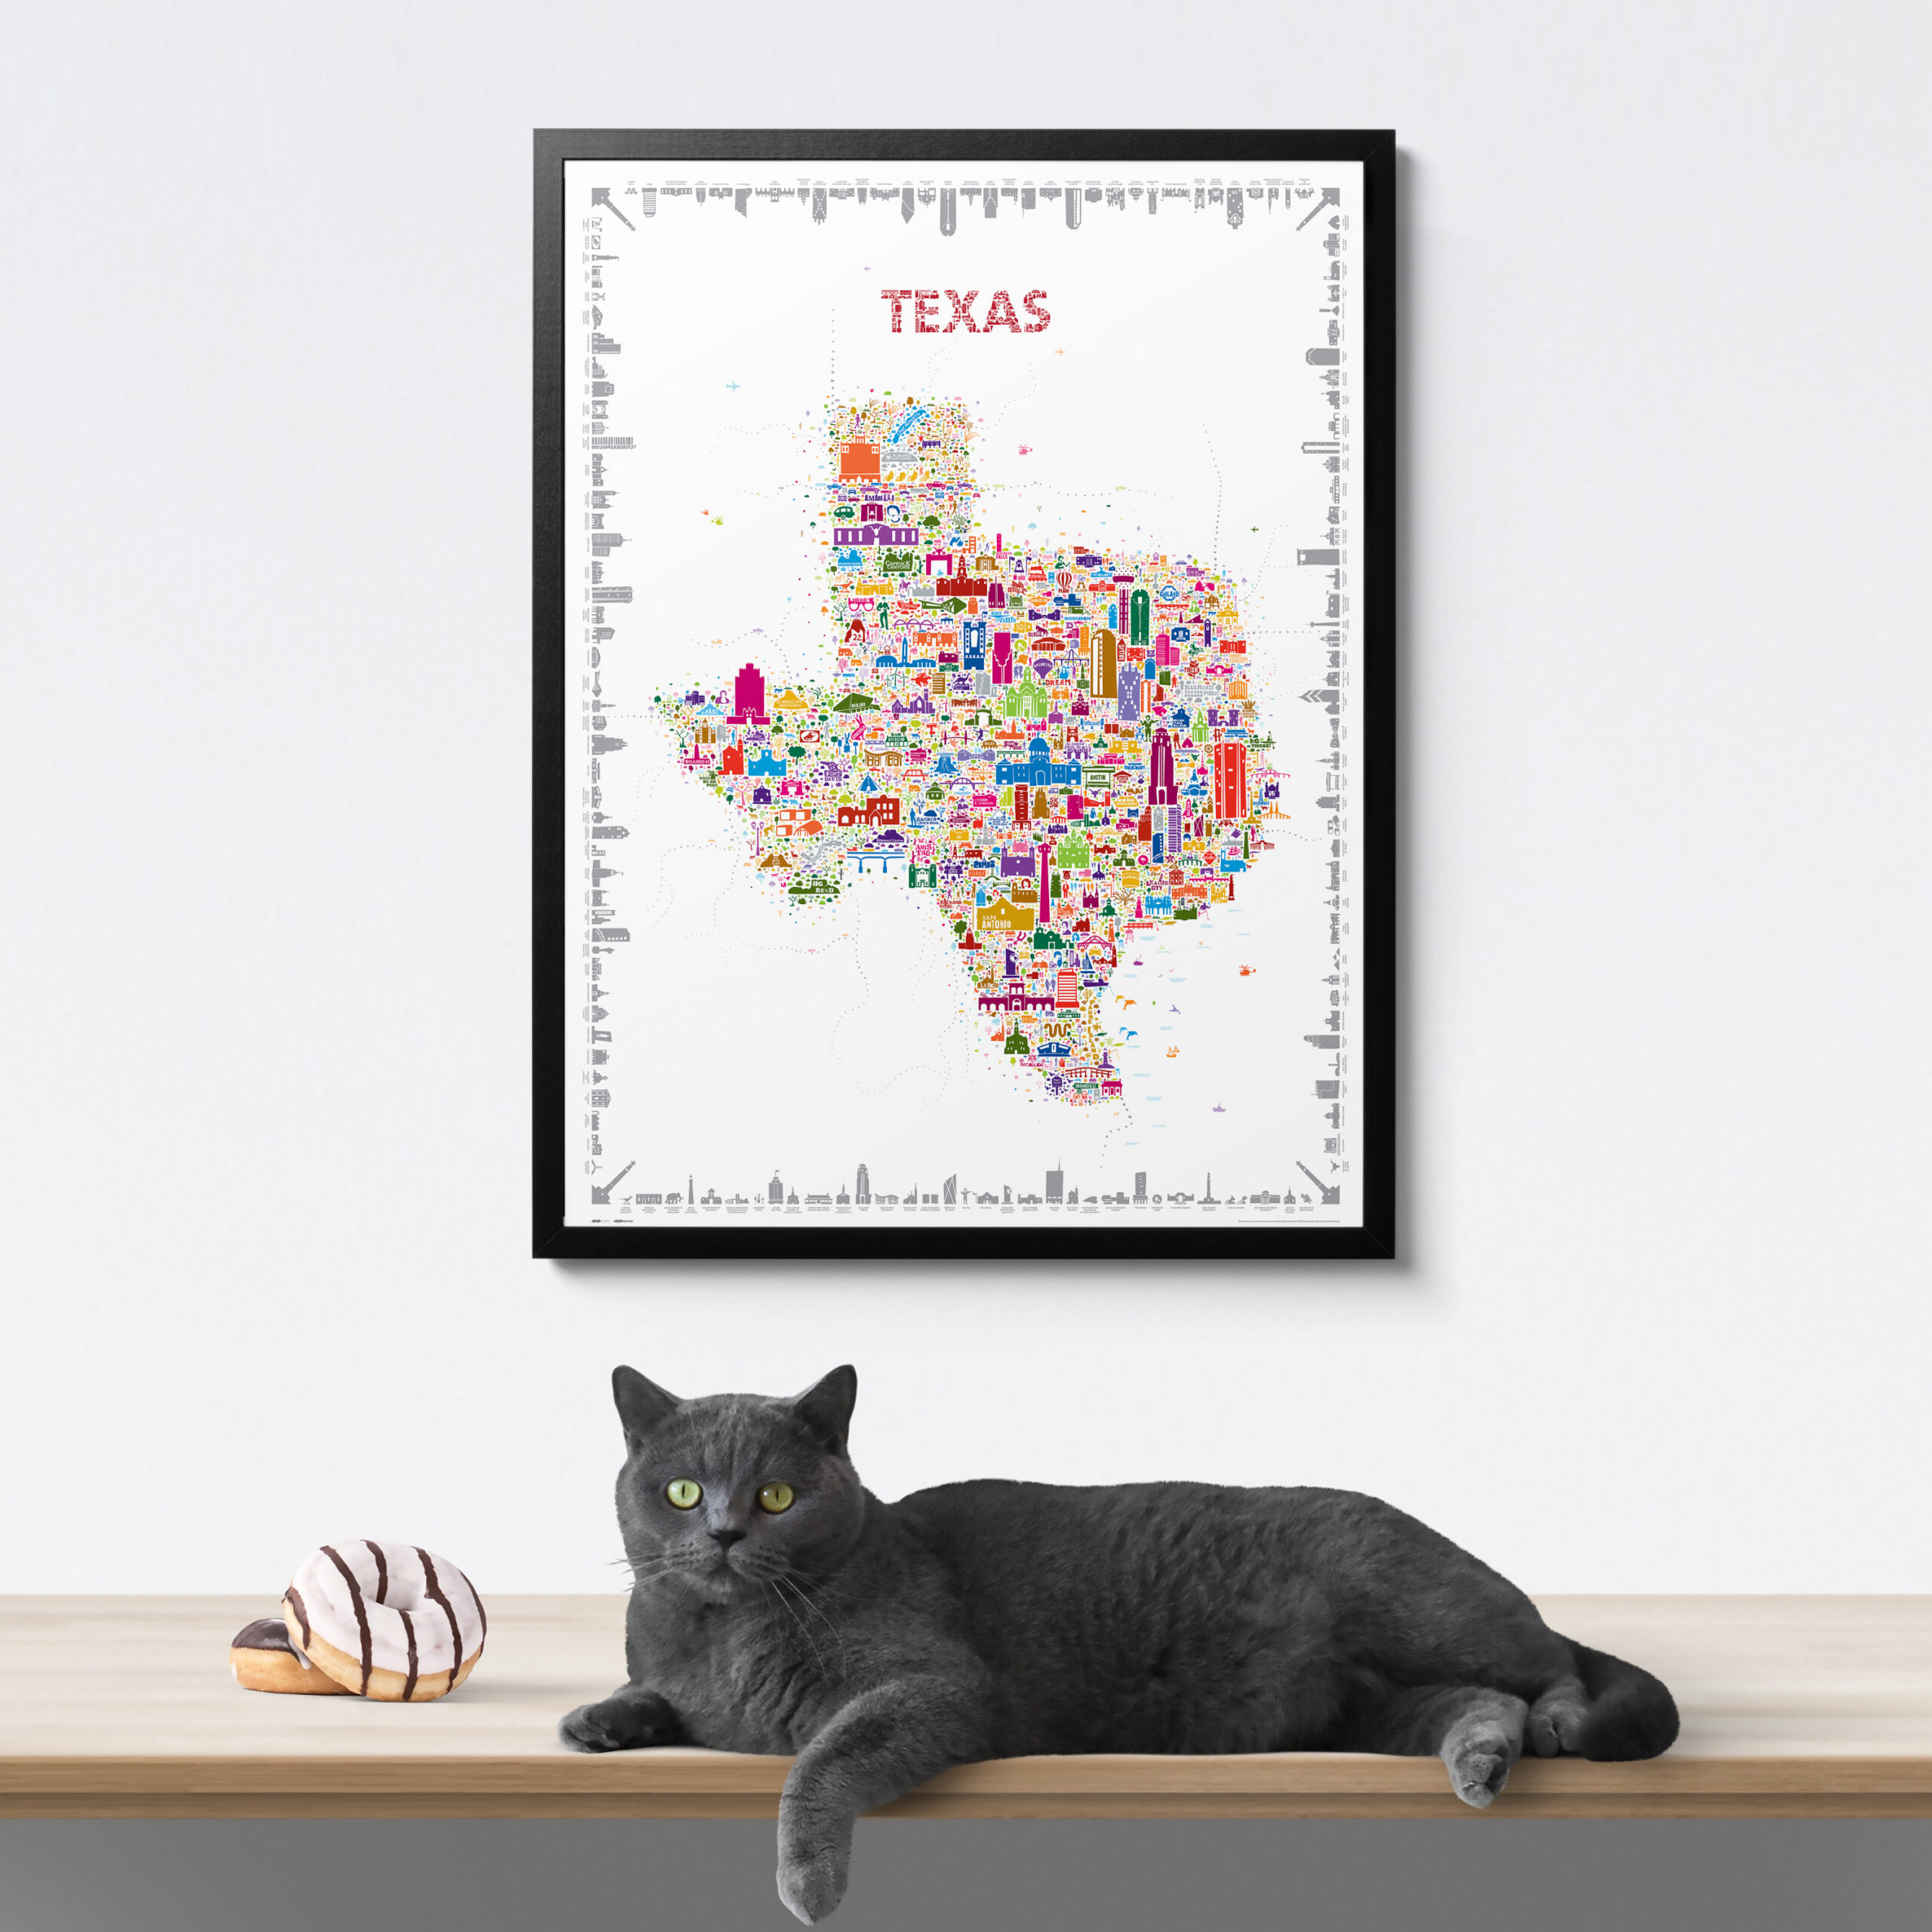 Lone Star State 1000 Piece Puzzle